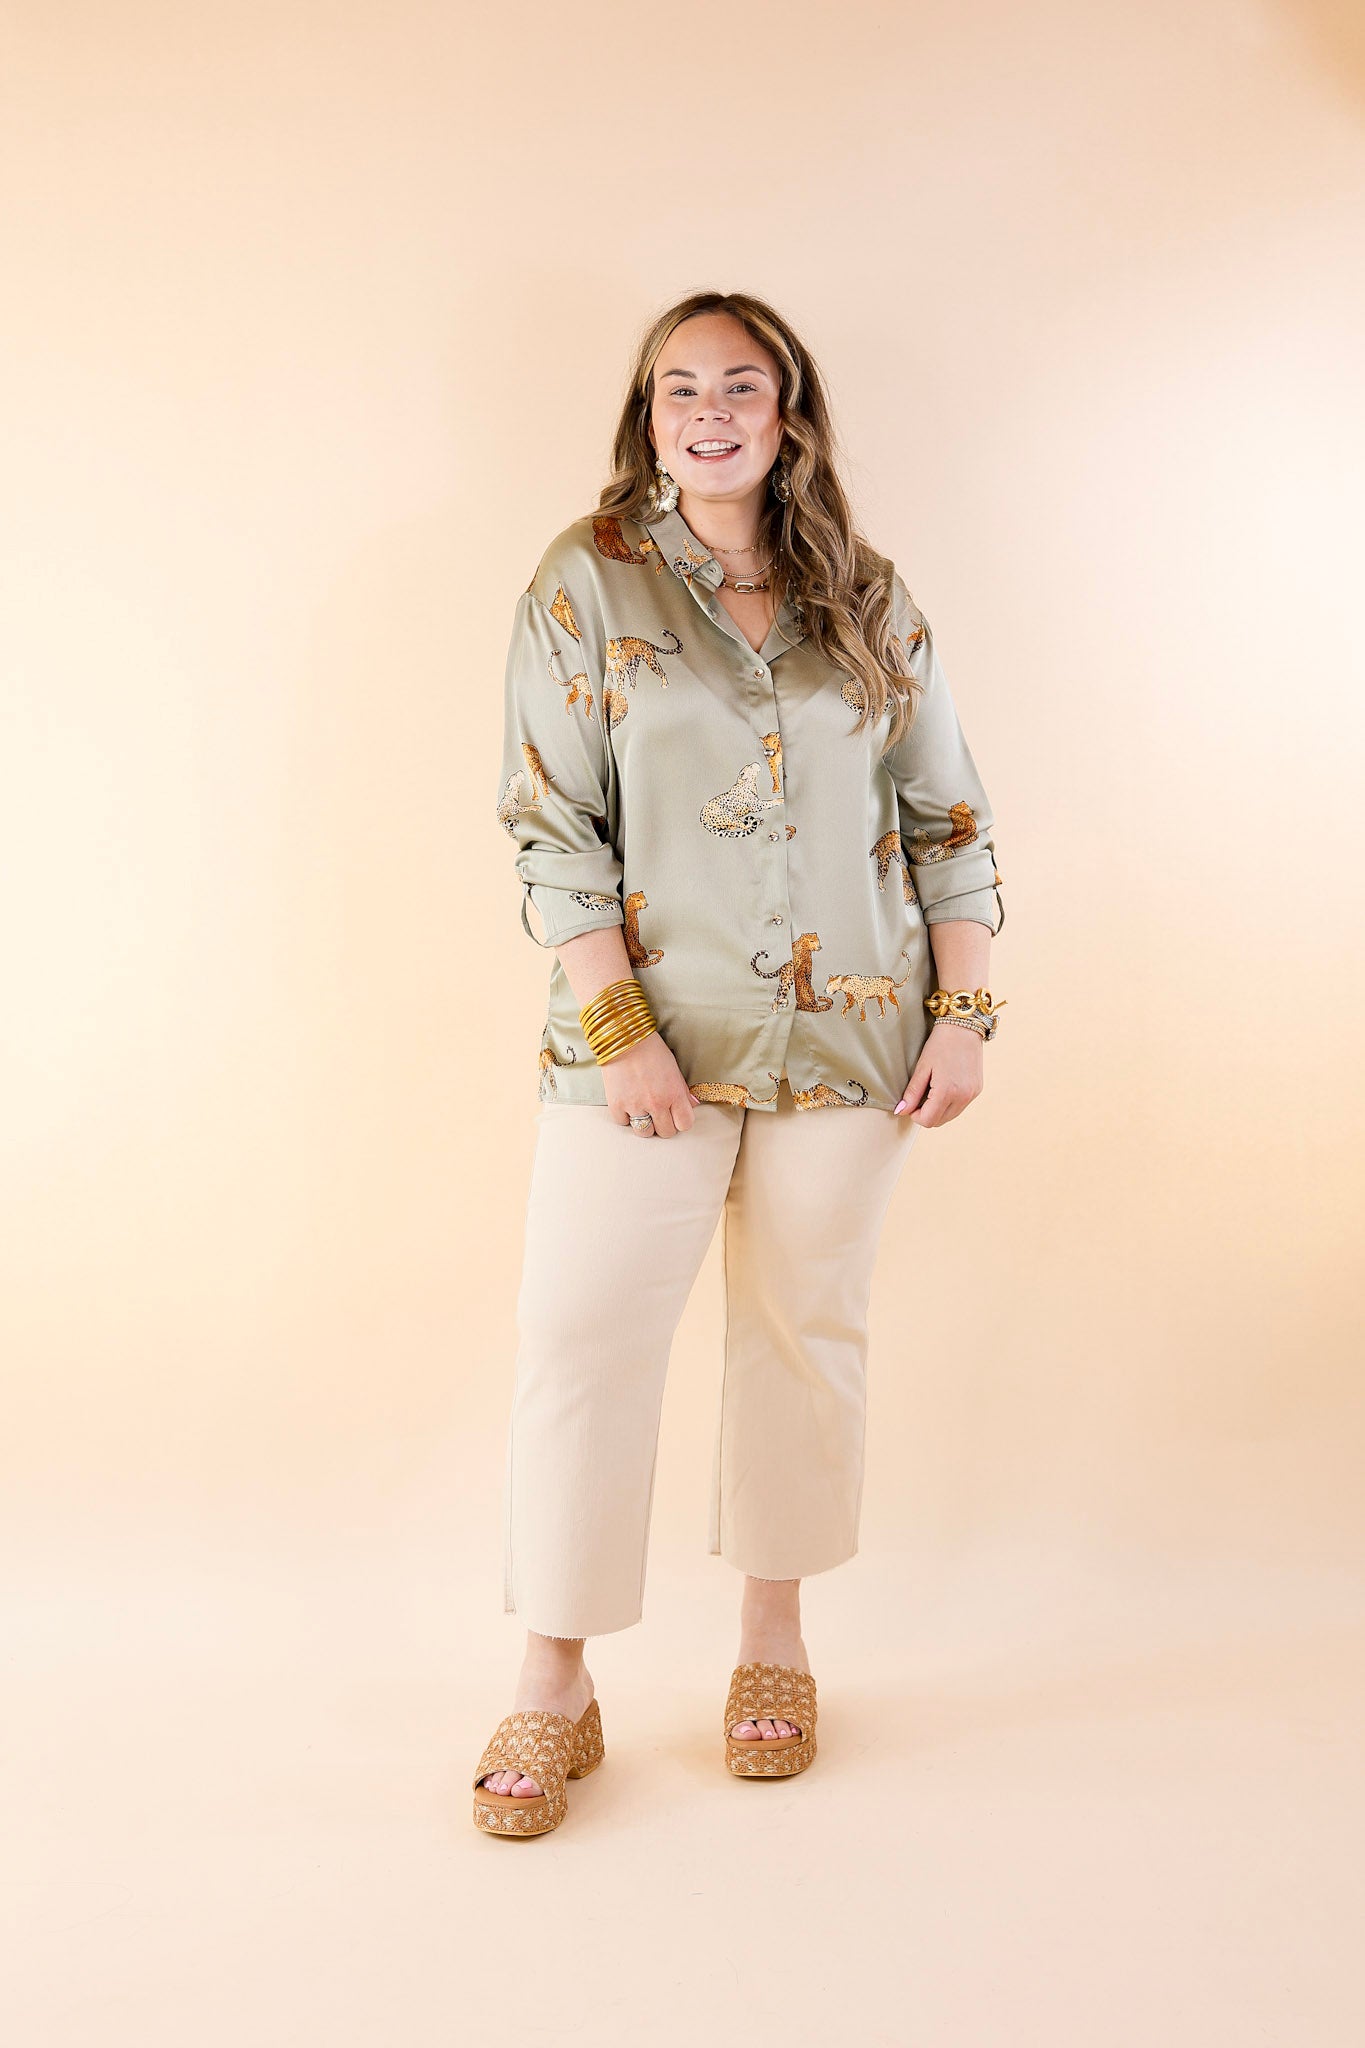 Wild For You Button Up Cheetah Print Top with Long Sleeves in Olive Green - Giddy Up Glamour Boutique